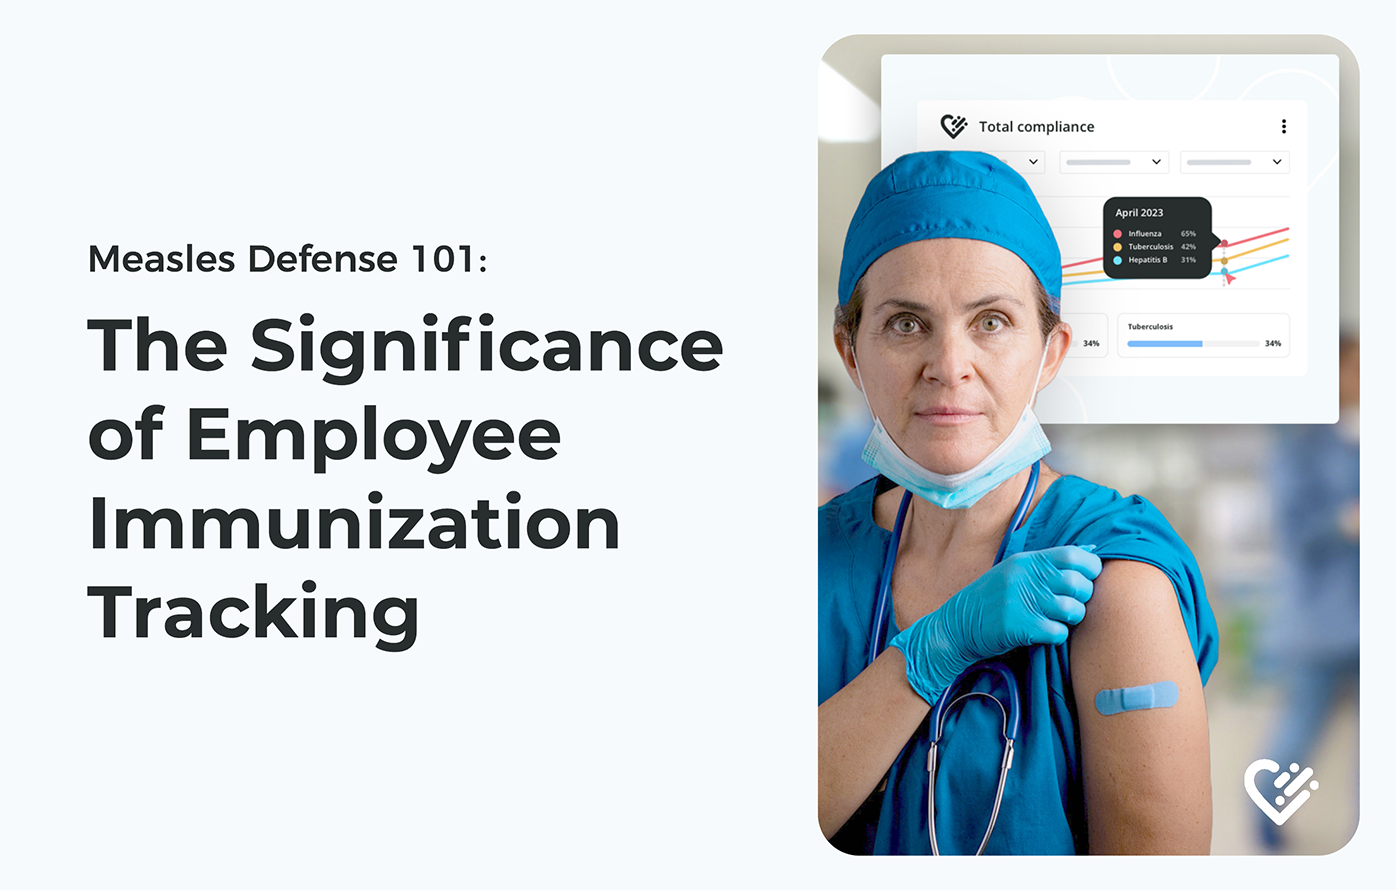 The Significance of Employee Immunization Tracking